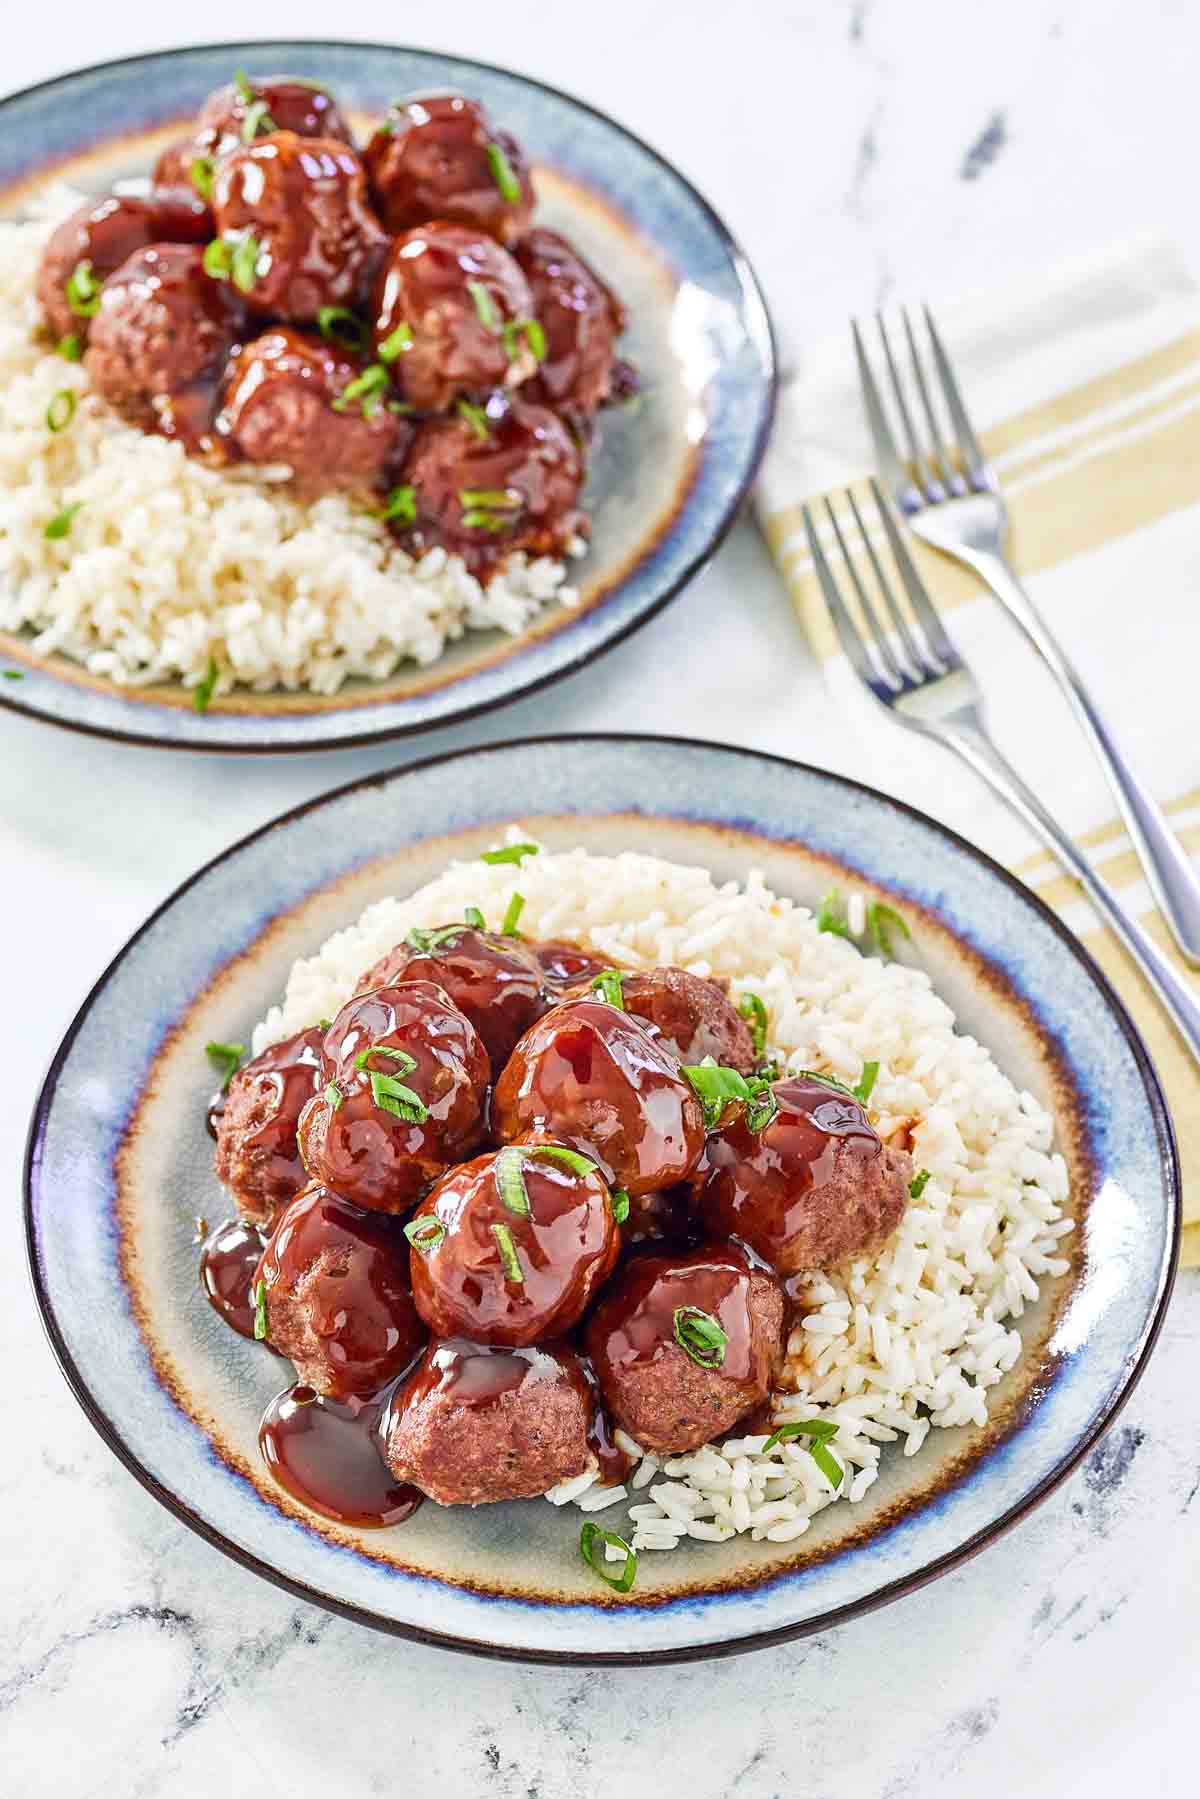 Sweet and sour meatballs over butter rice on two plates.